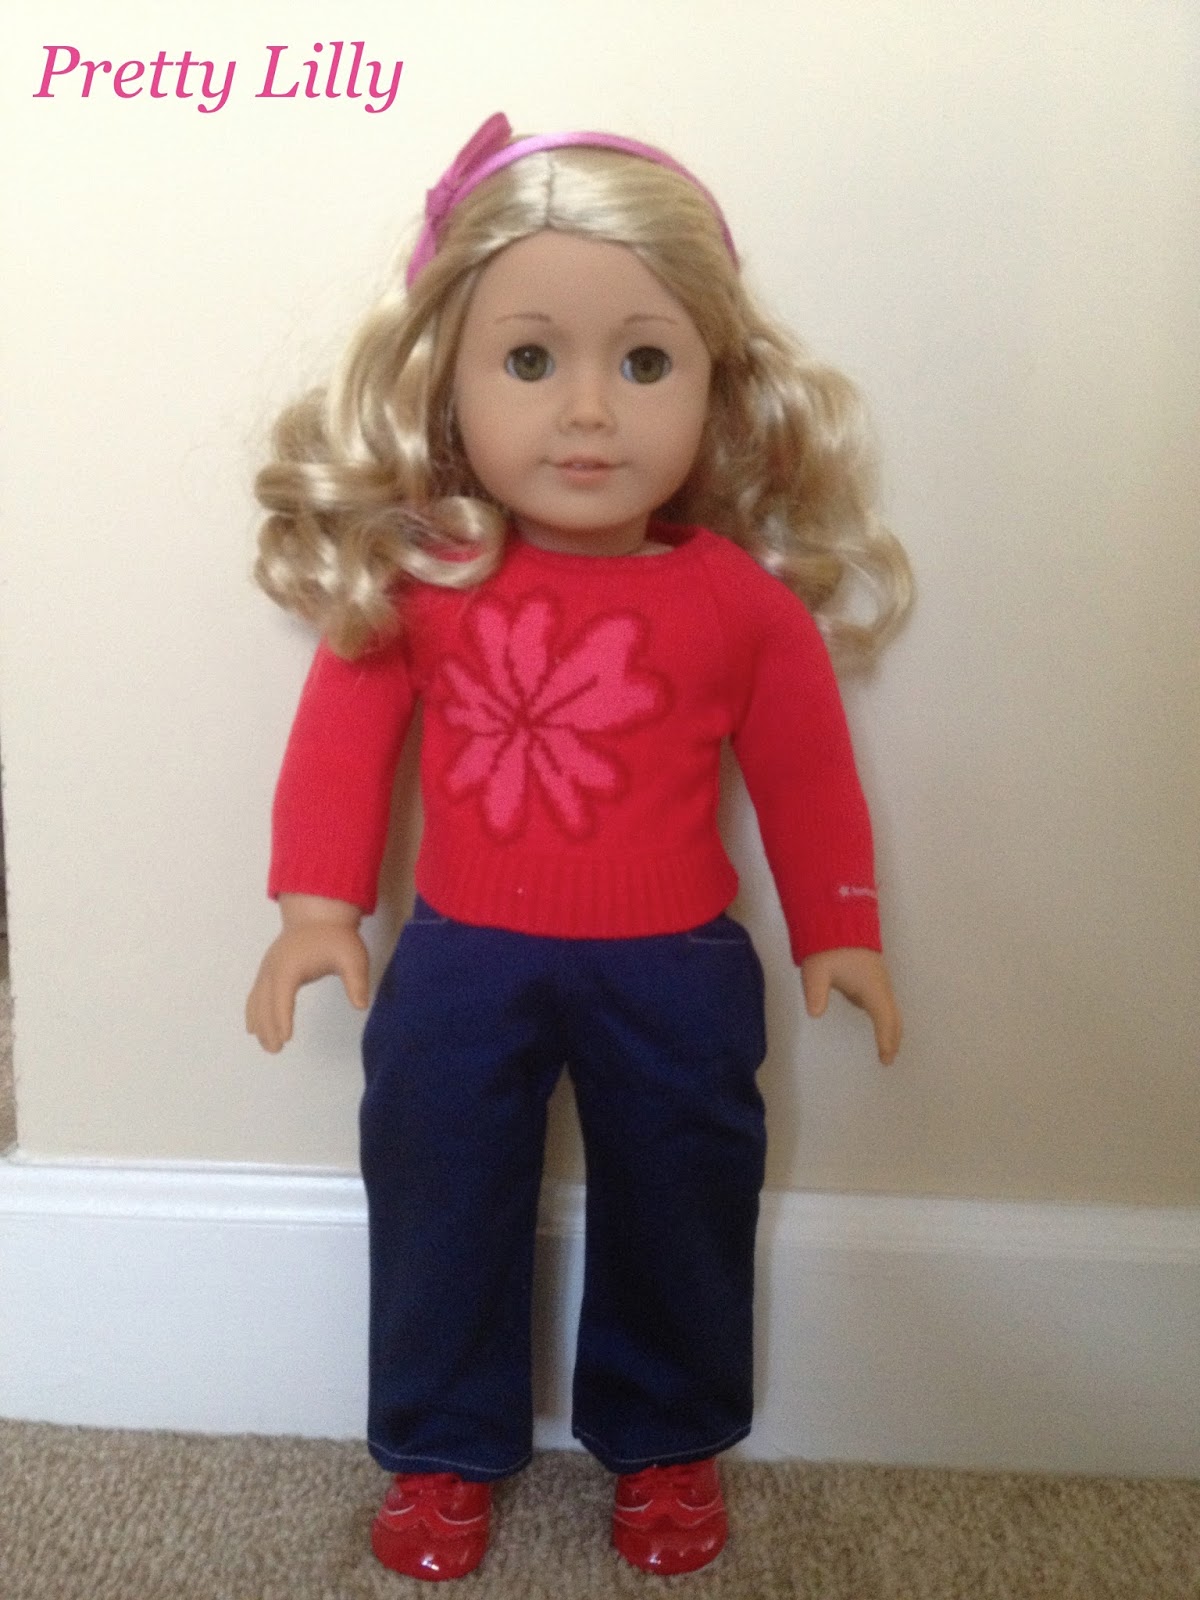 Pretty Lilly an American Girl: Mix and Match Collection